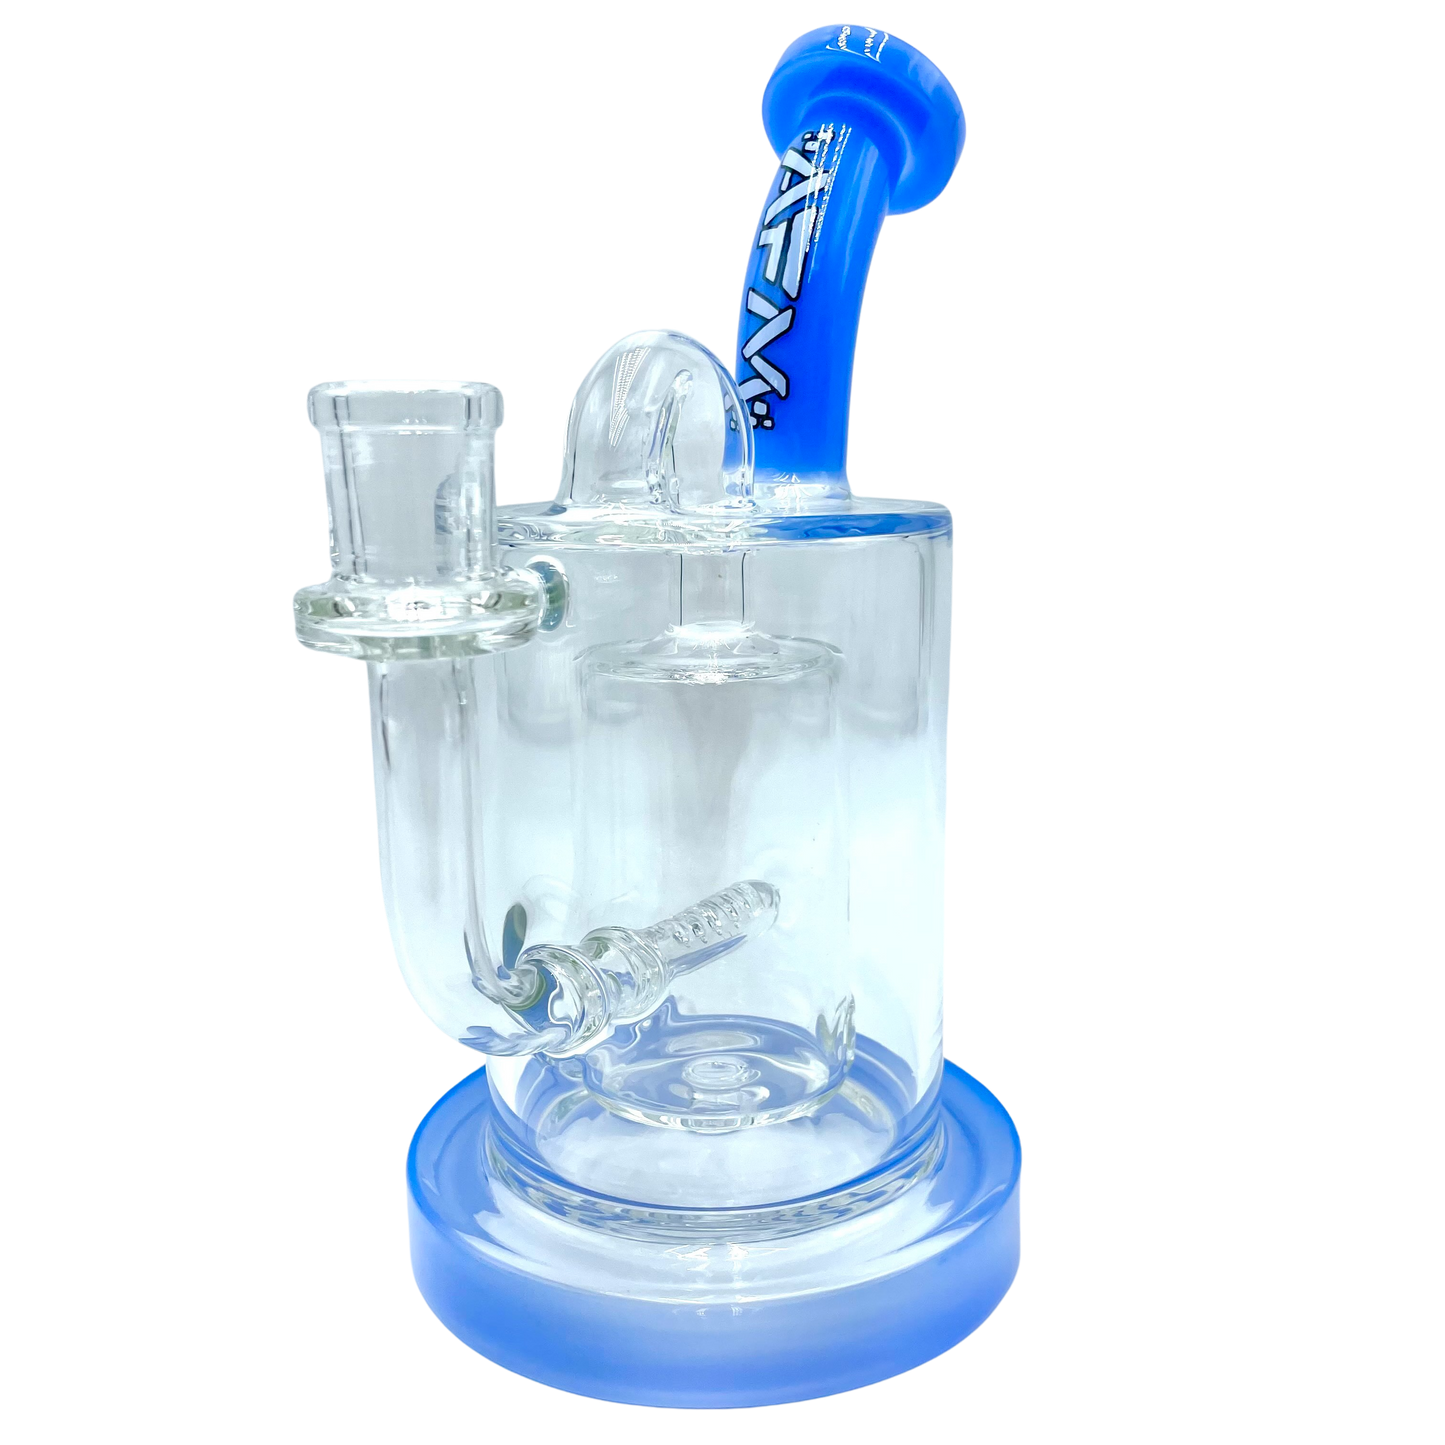 The Pump Recycler - 8"